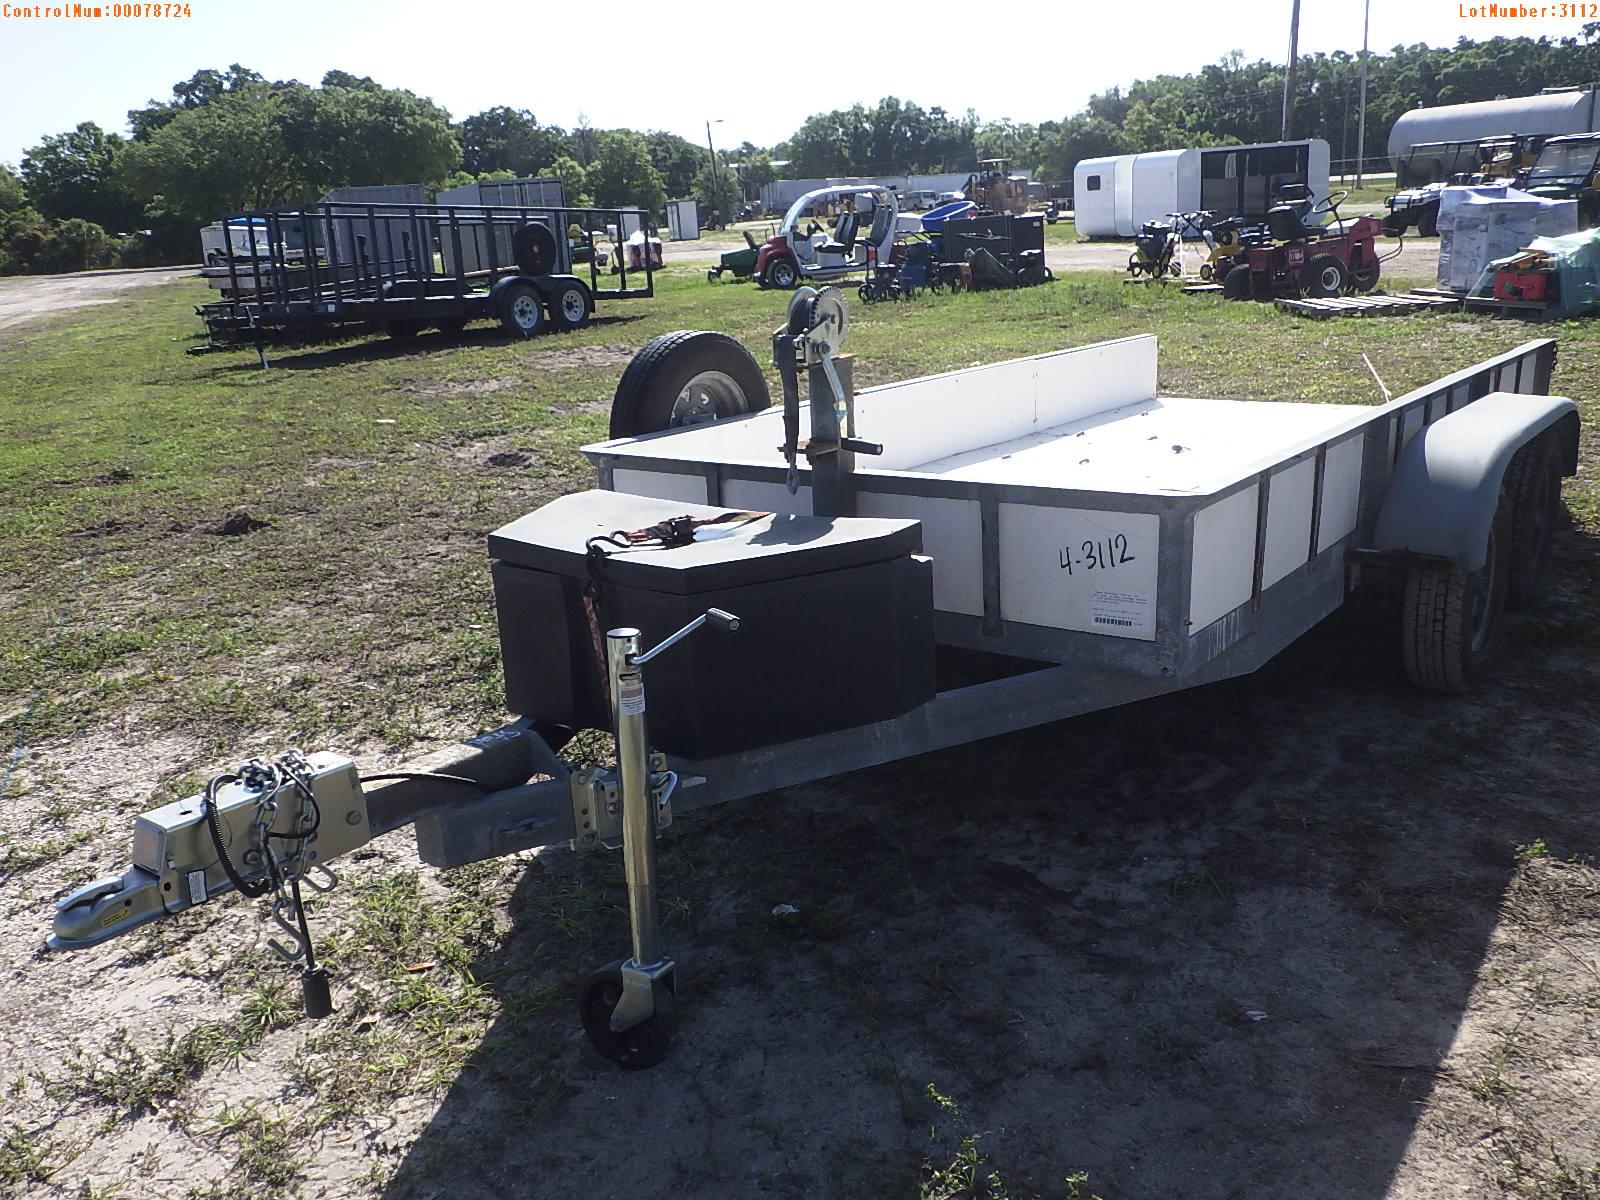 4-03112 (Trailers-Utility flatbed)  Seller: Florida State F.W.C. 2005 HIKG 18 FO